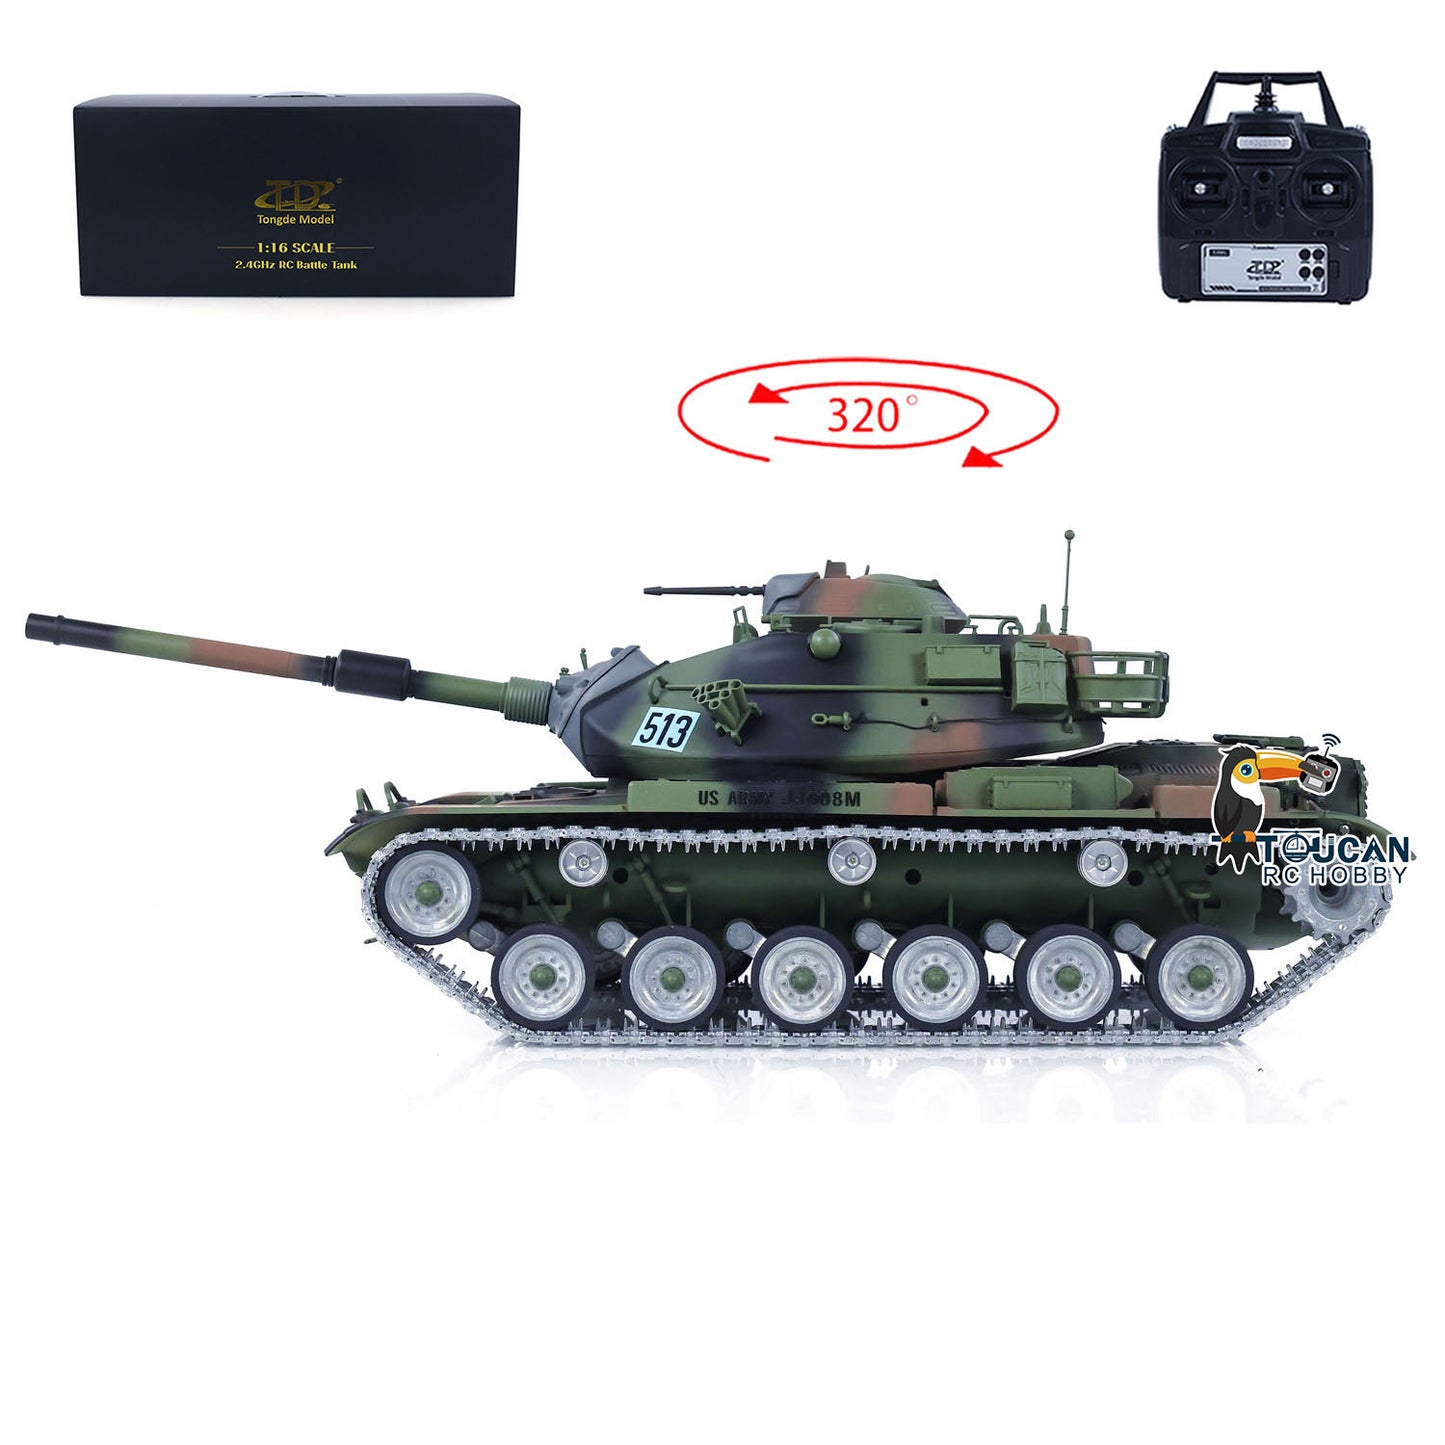 IN STOCK Tongde M60A3 1/16 RC Tank Remote Control Infrared Battle Panzer Camo Lights Painted Assembled Hobby Models Optional Version